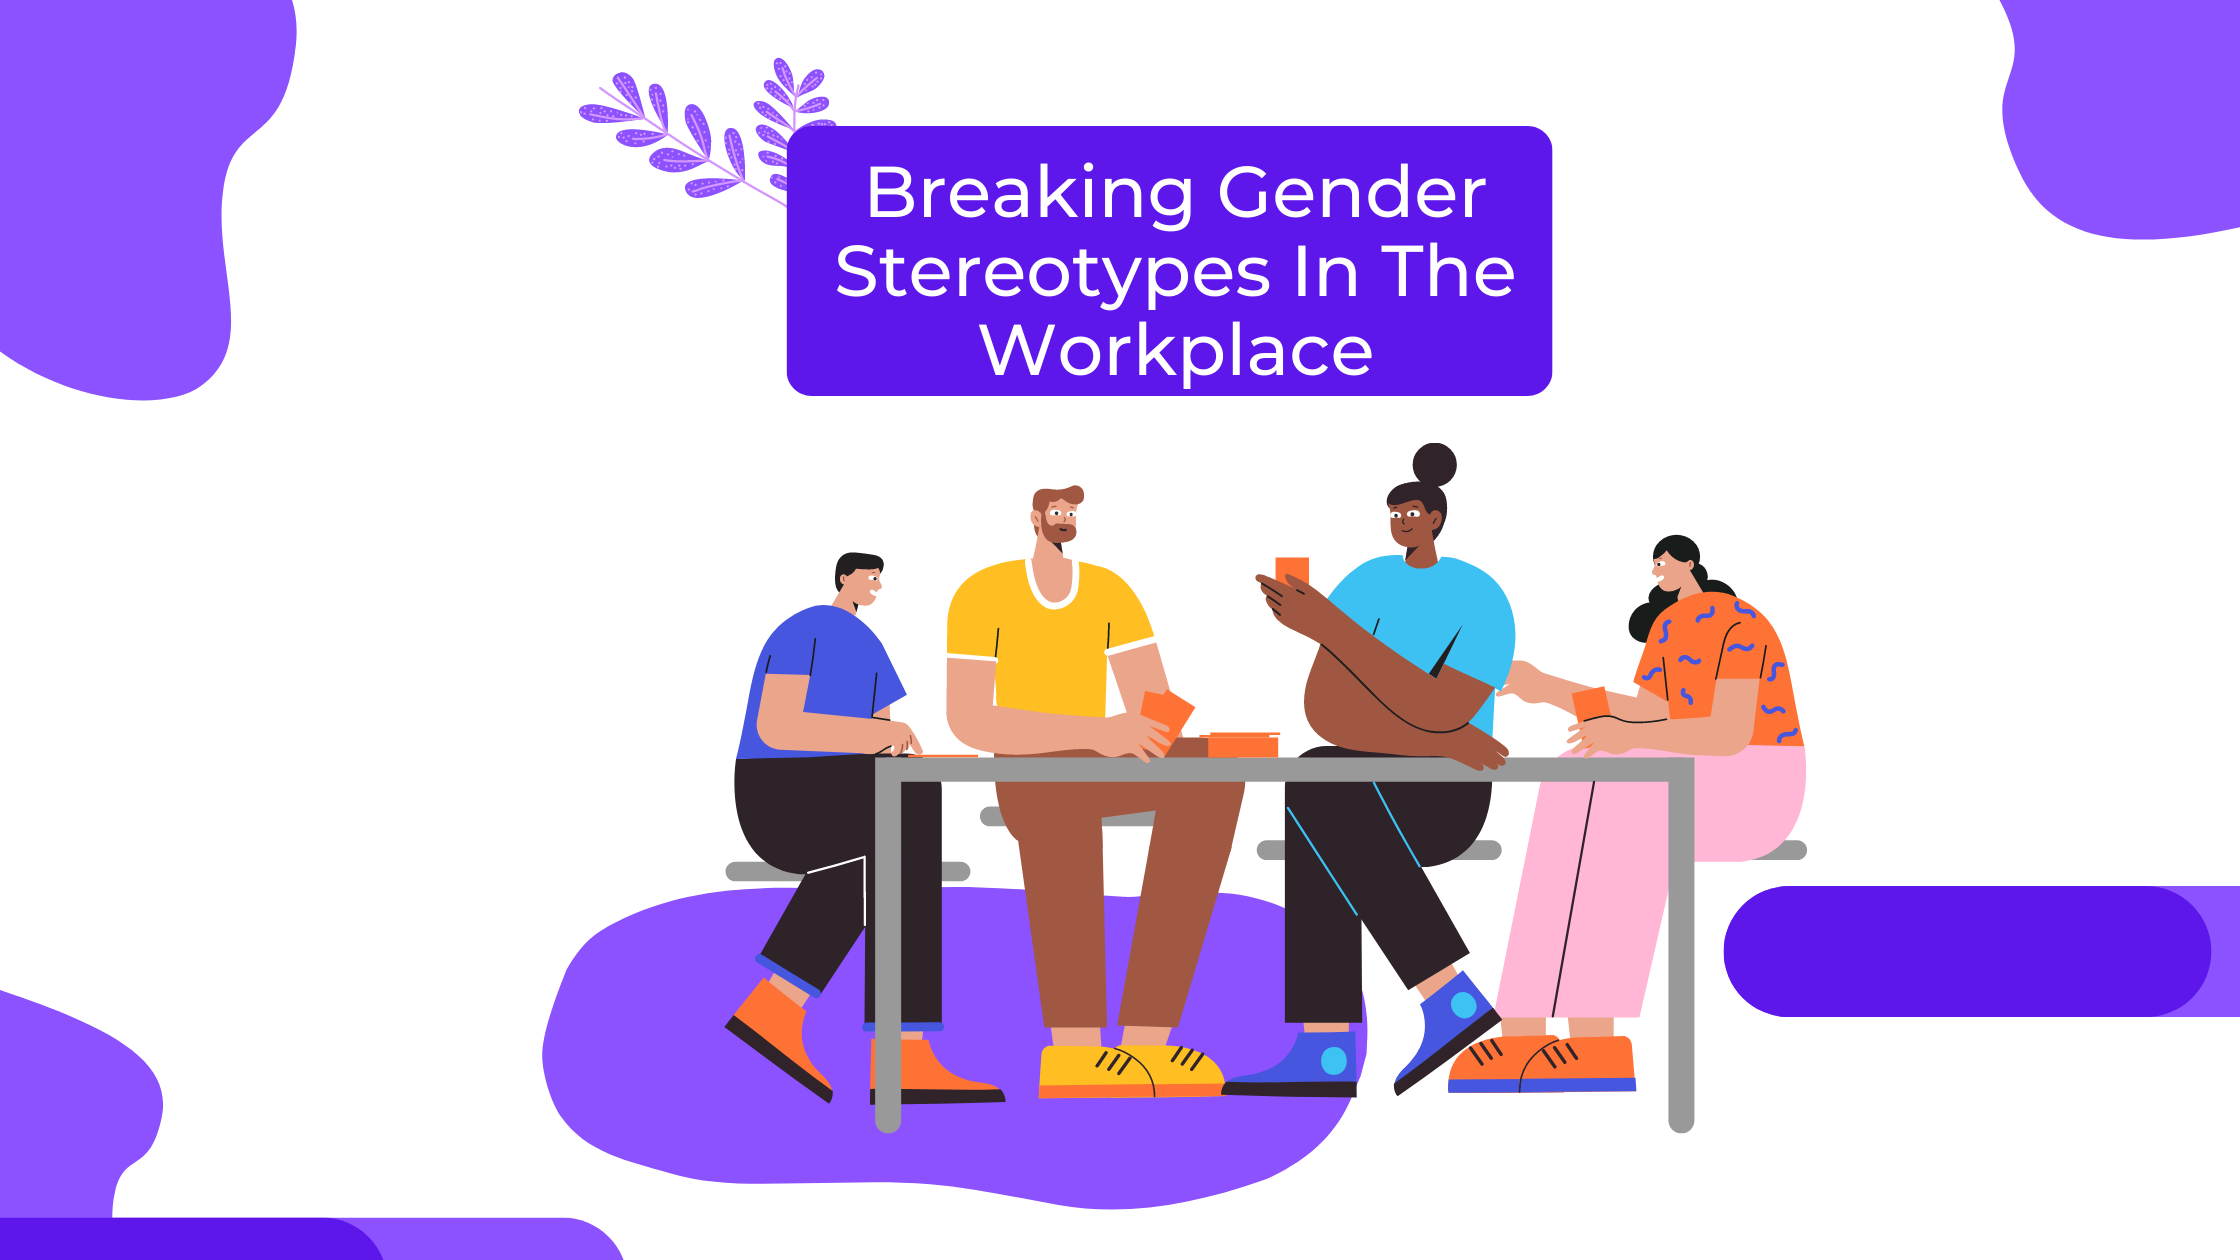 Breaking Gender Stereotypes In The Workplace